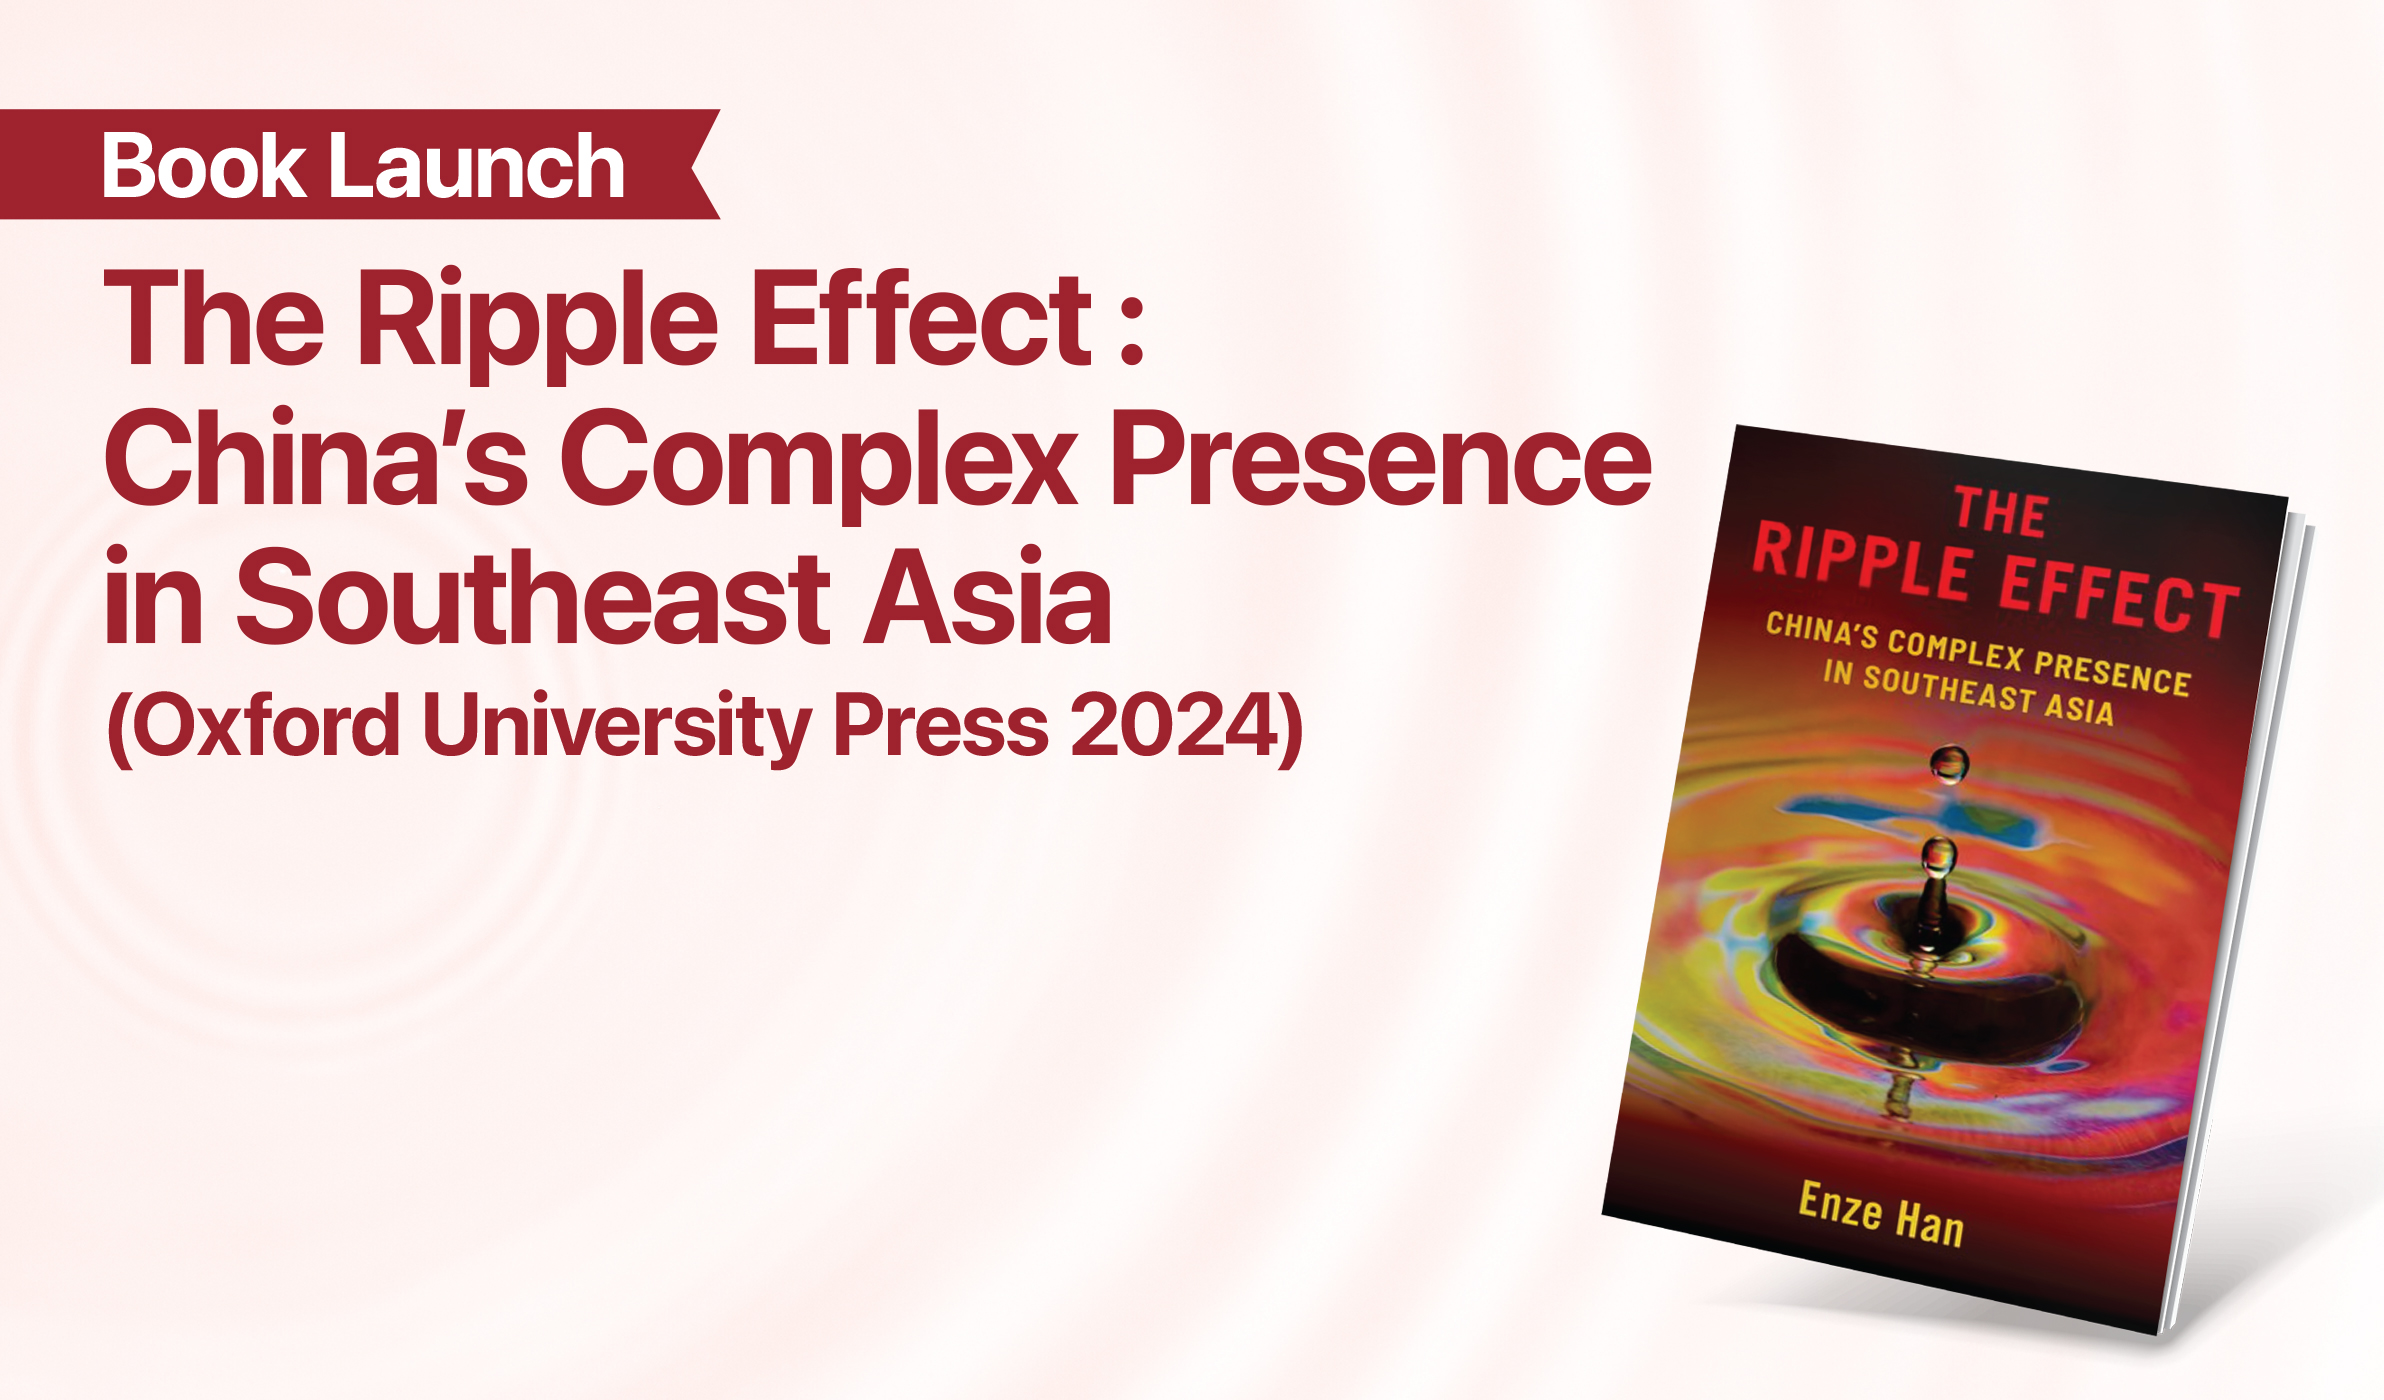 HKU Research Hub of Population Studies: Book Launch on The Ripple Effect: China’s Complex Presence in Southeast Asia